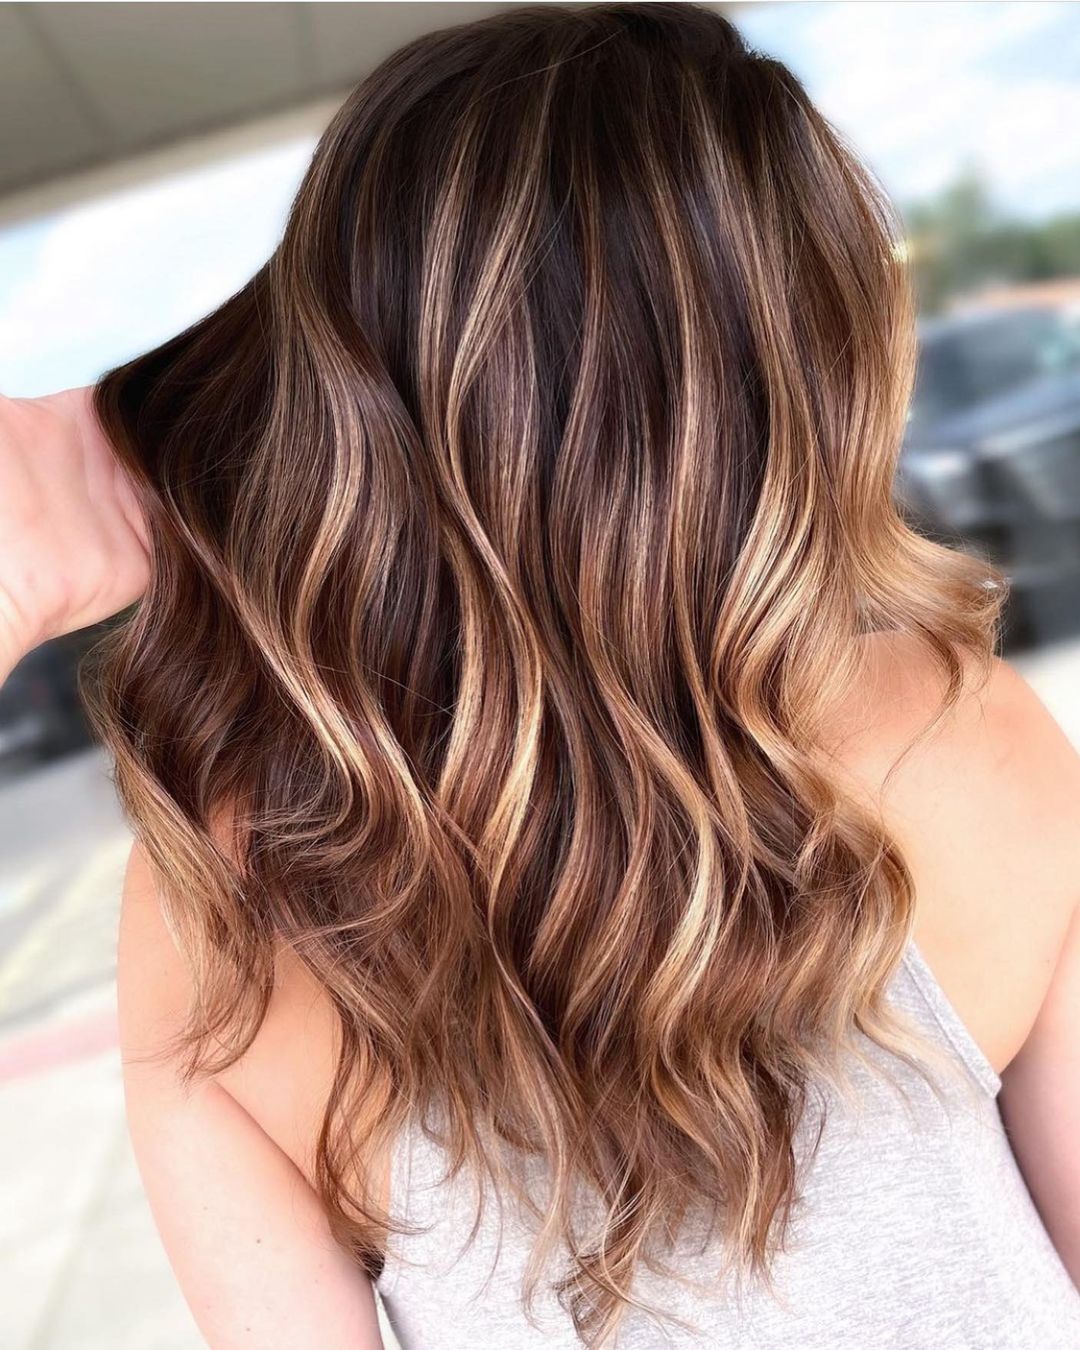 50 Awesome Long Layered Hair Ideas For 2021 images 8